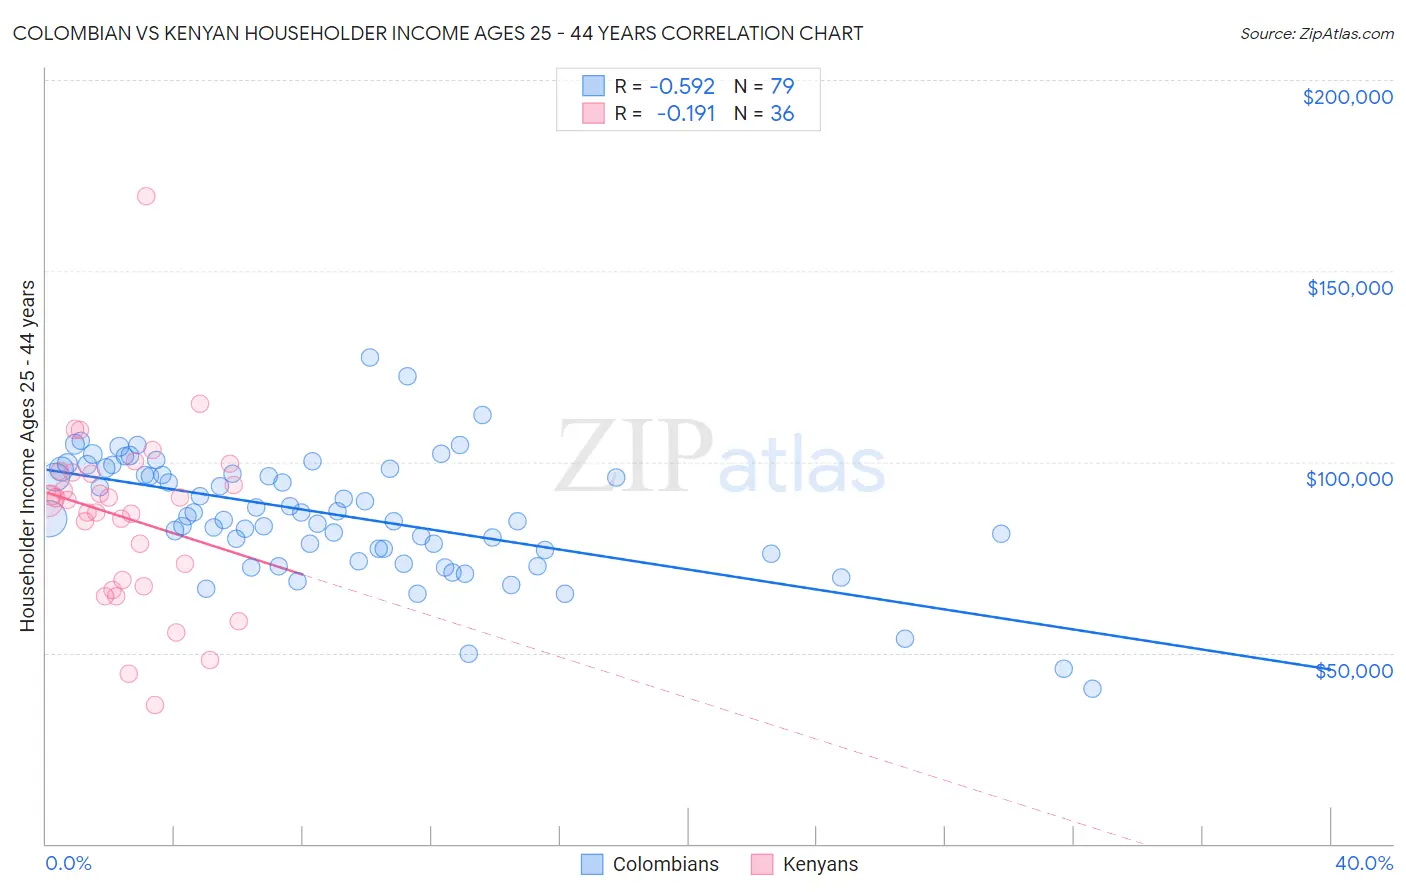 Colombian vs Kenyan Householder Income Ages 25 - 44 years